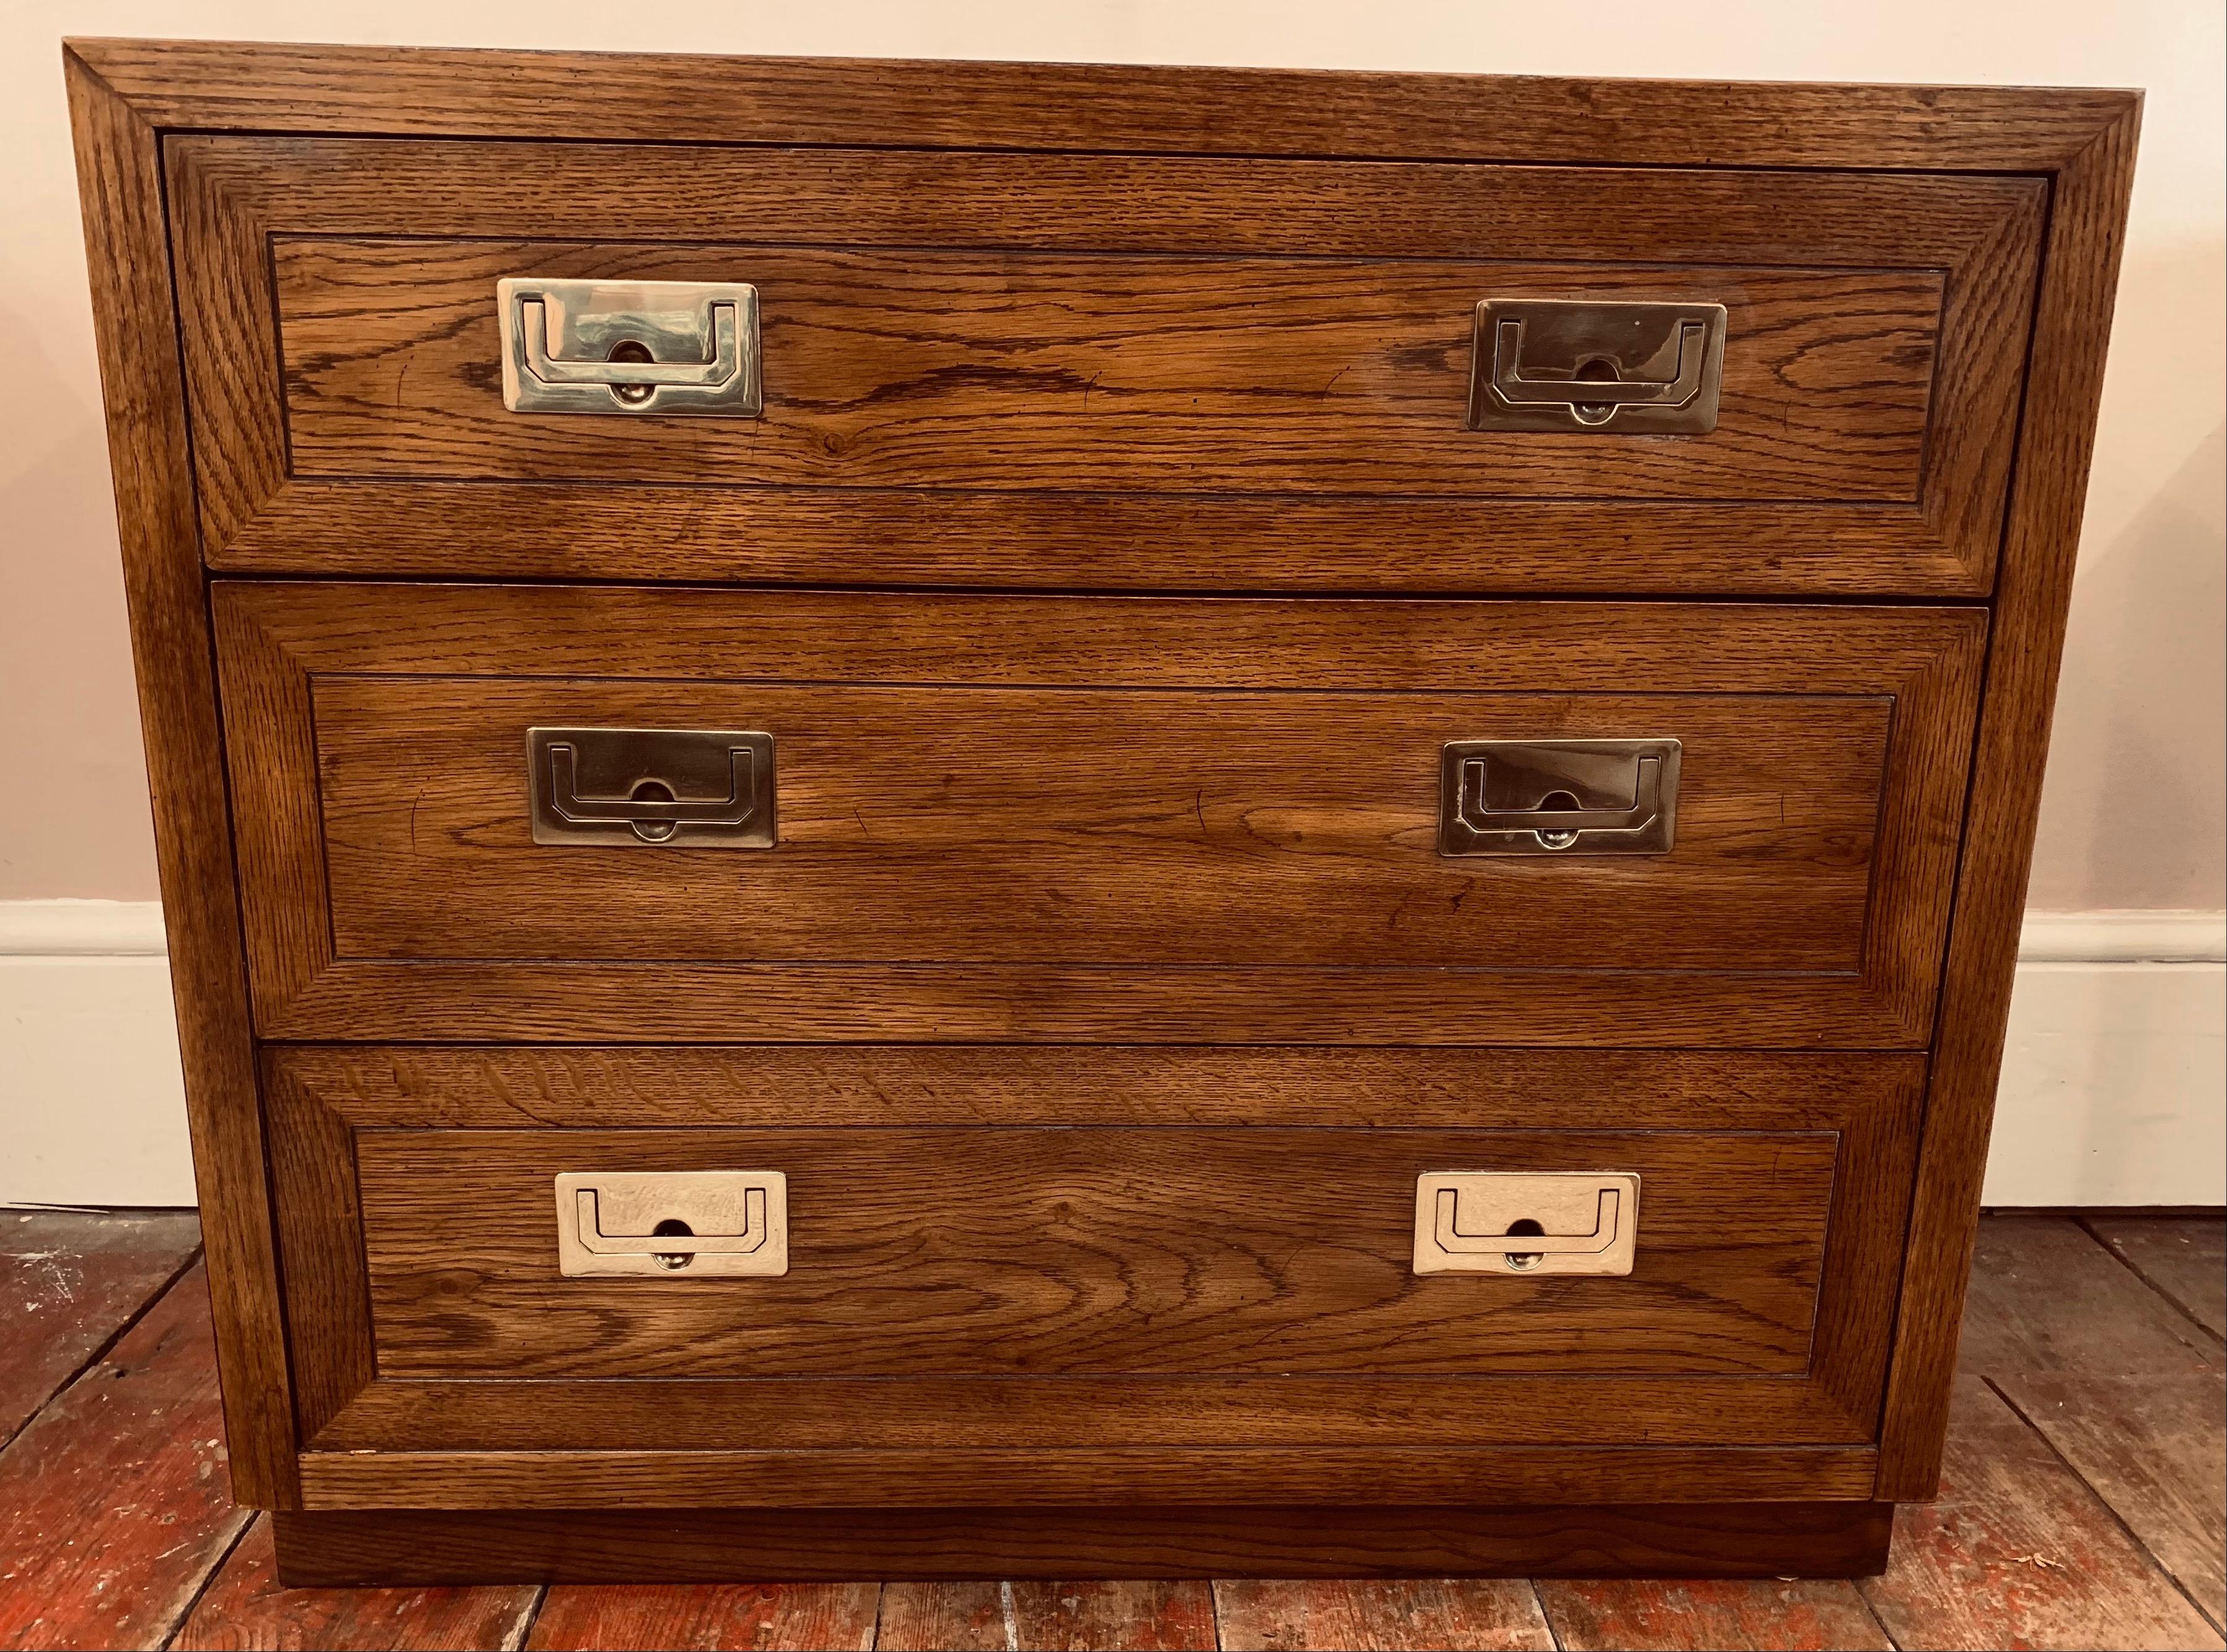 A vintage, 1970s, Henredon USA, Campaign chest of 3 long drawers. Hollywood Regency style. Made from stained Oak, with their original polished brass hardware handles and hinges. The chest is well made, solid and very heavy considering its size. The